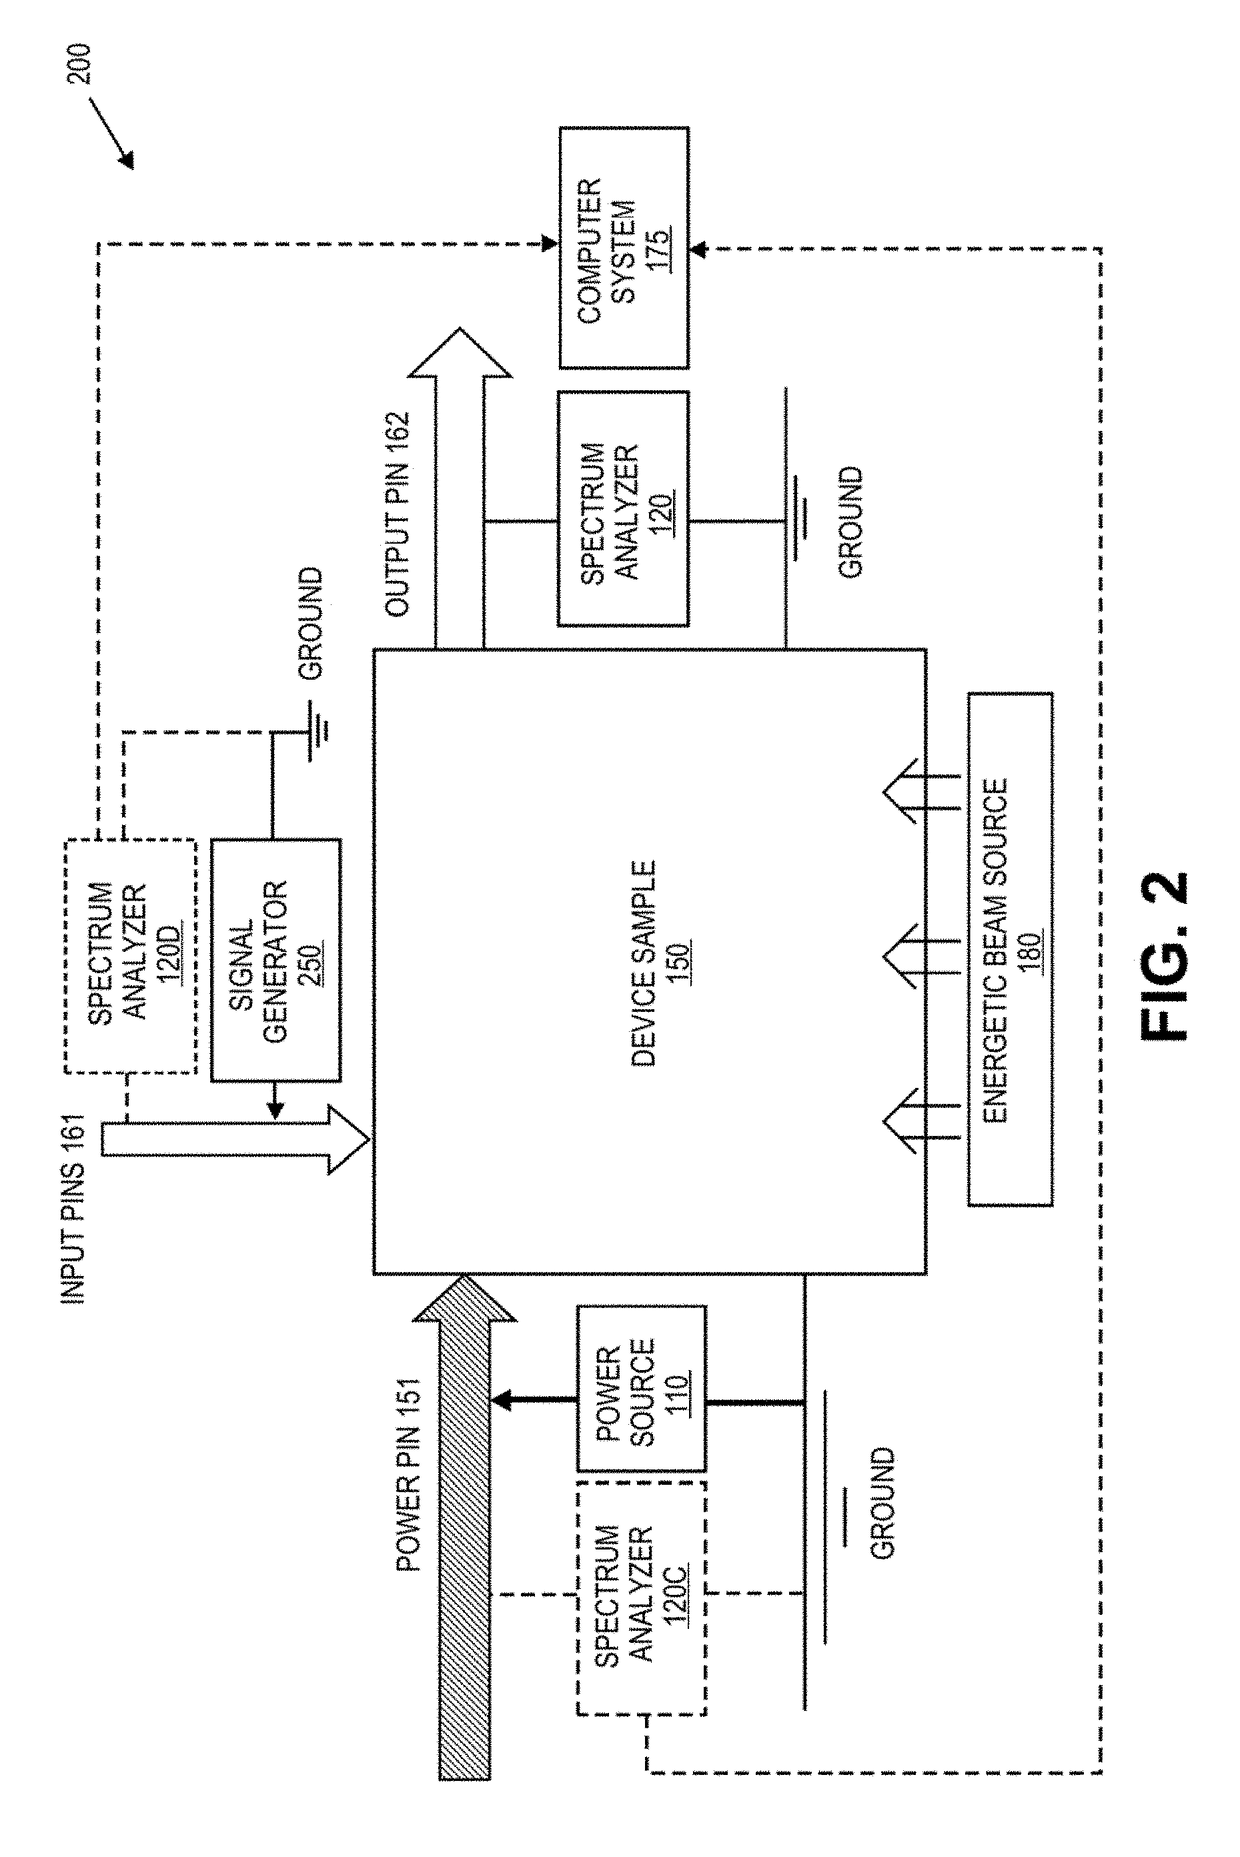 Defect screening method for electronic circuits and circuit components using power spectrum anaylysis